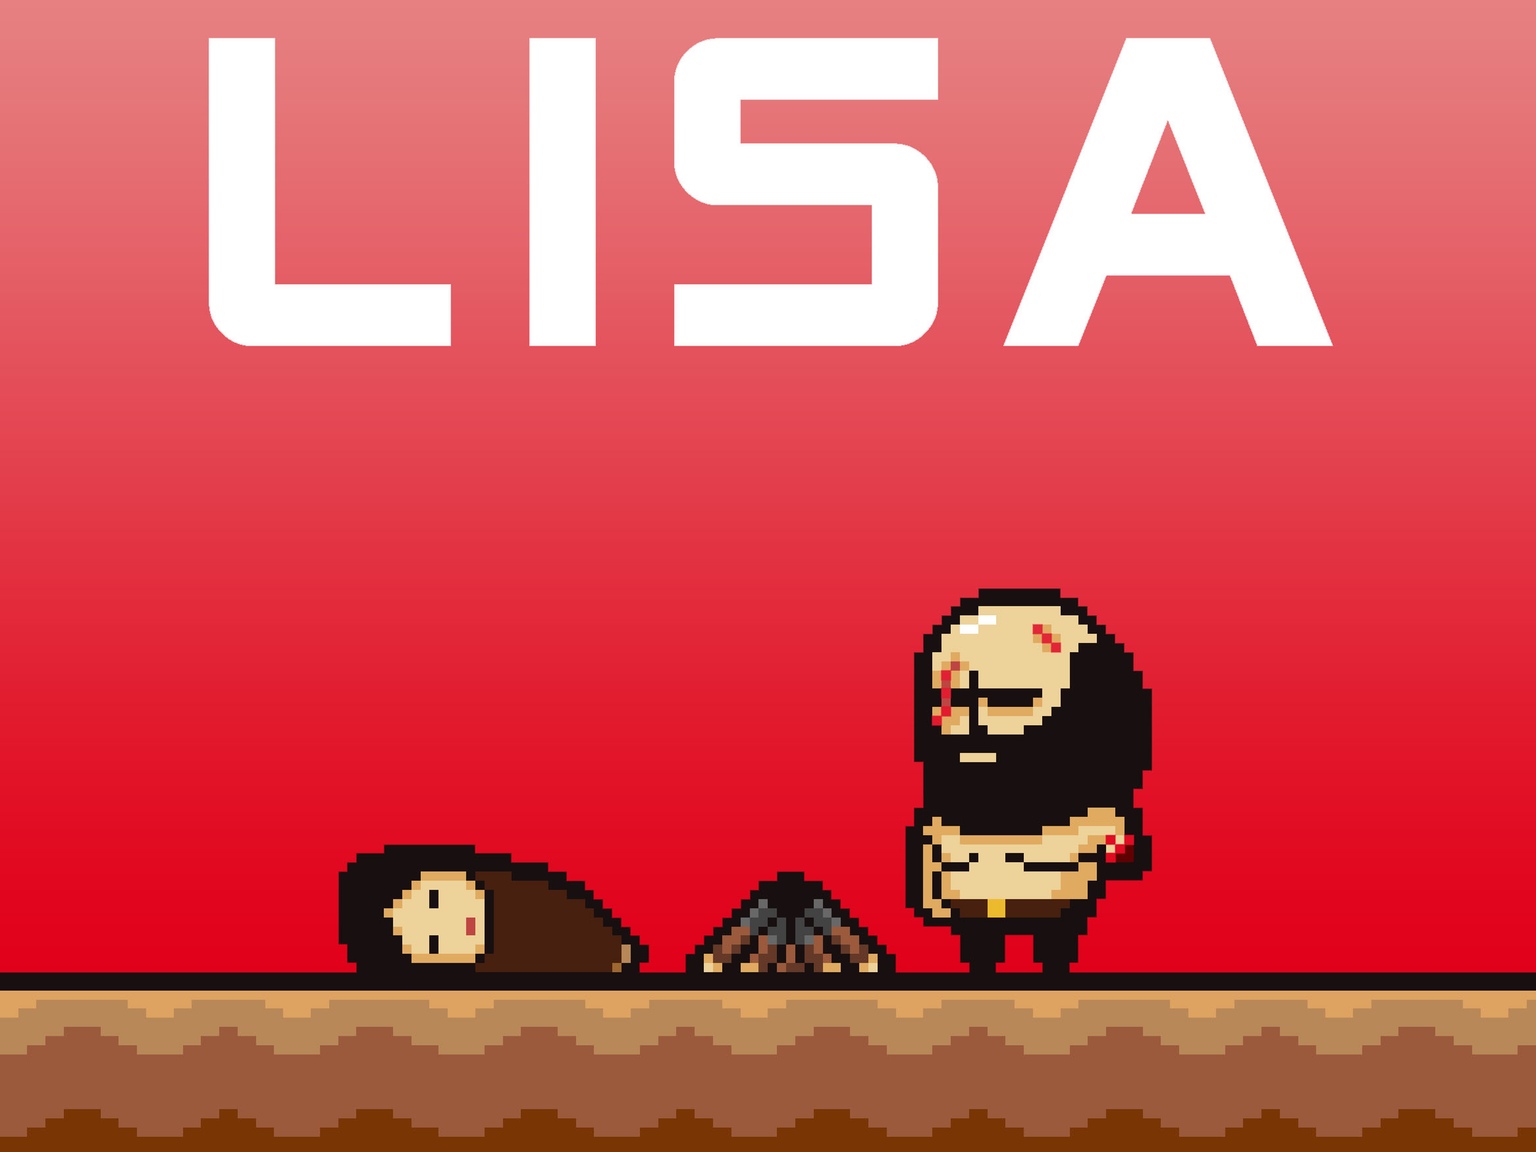 LISA: Complete Edition iOS Latest Version Free Download